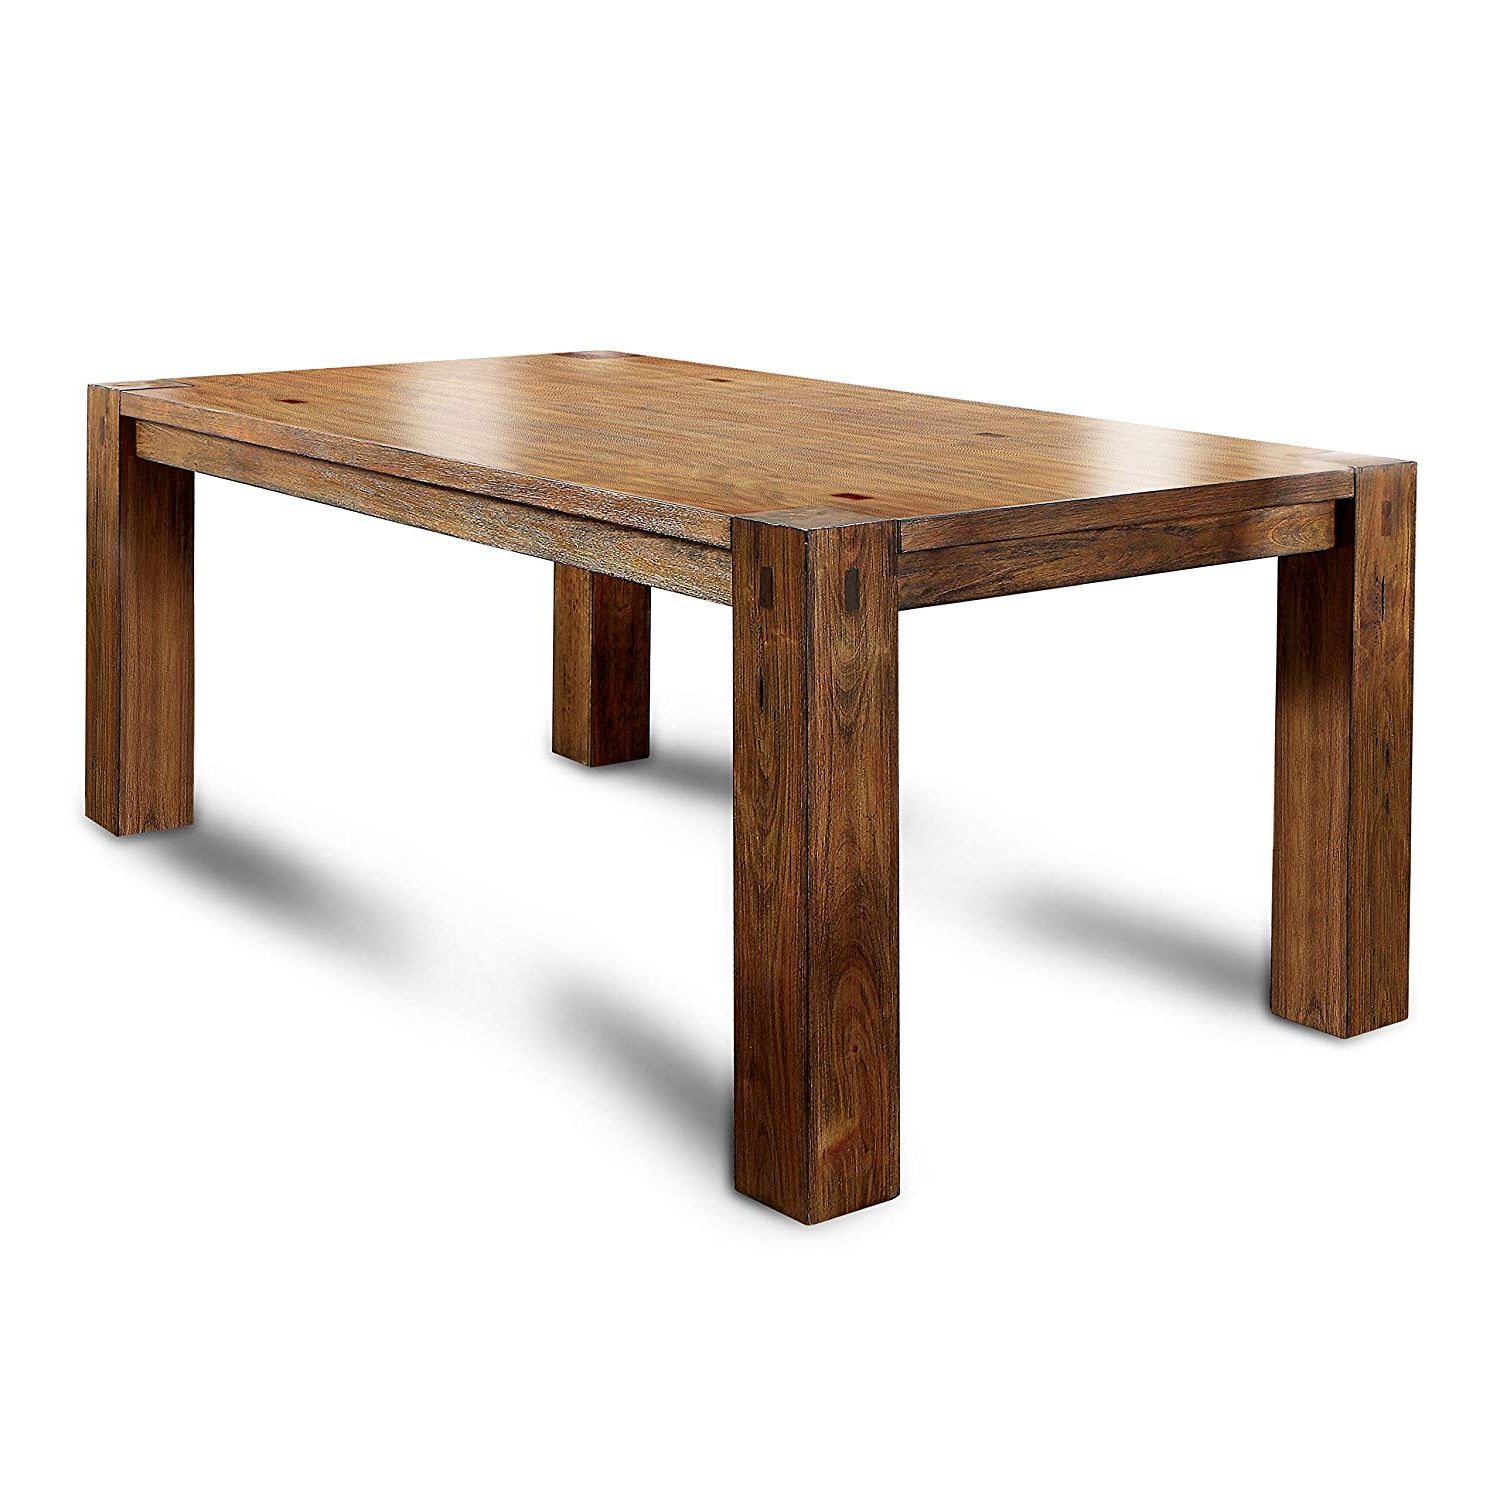 Well Known Maynard 5 Piece Dining Sets In Furniture Of America Maynard Wooden Dining Table (View 19 of 20)